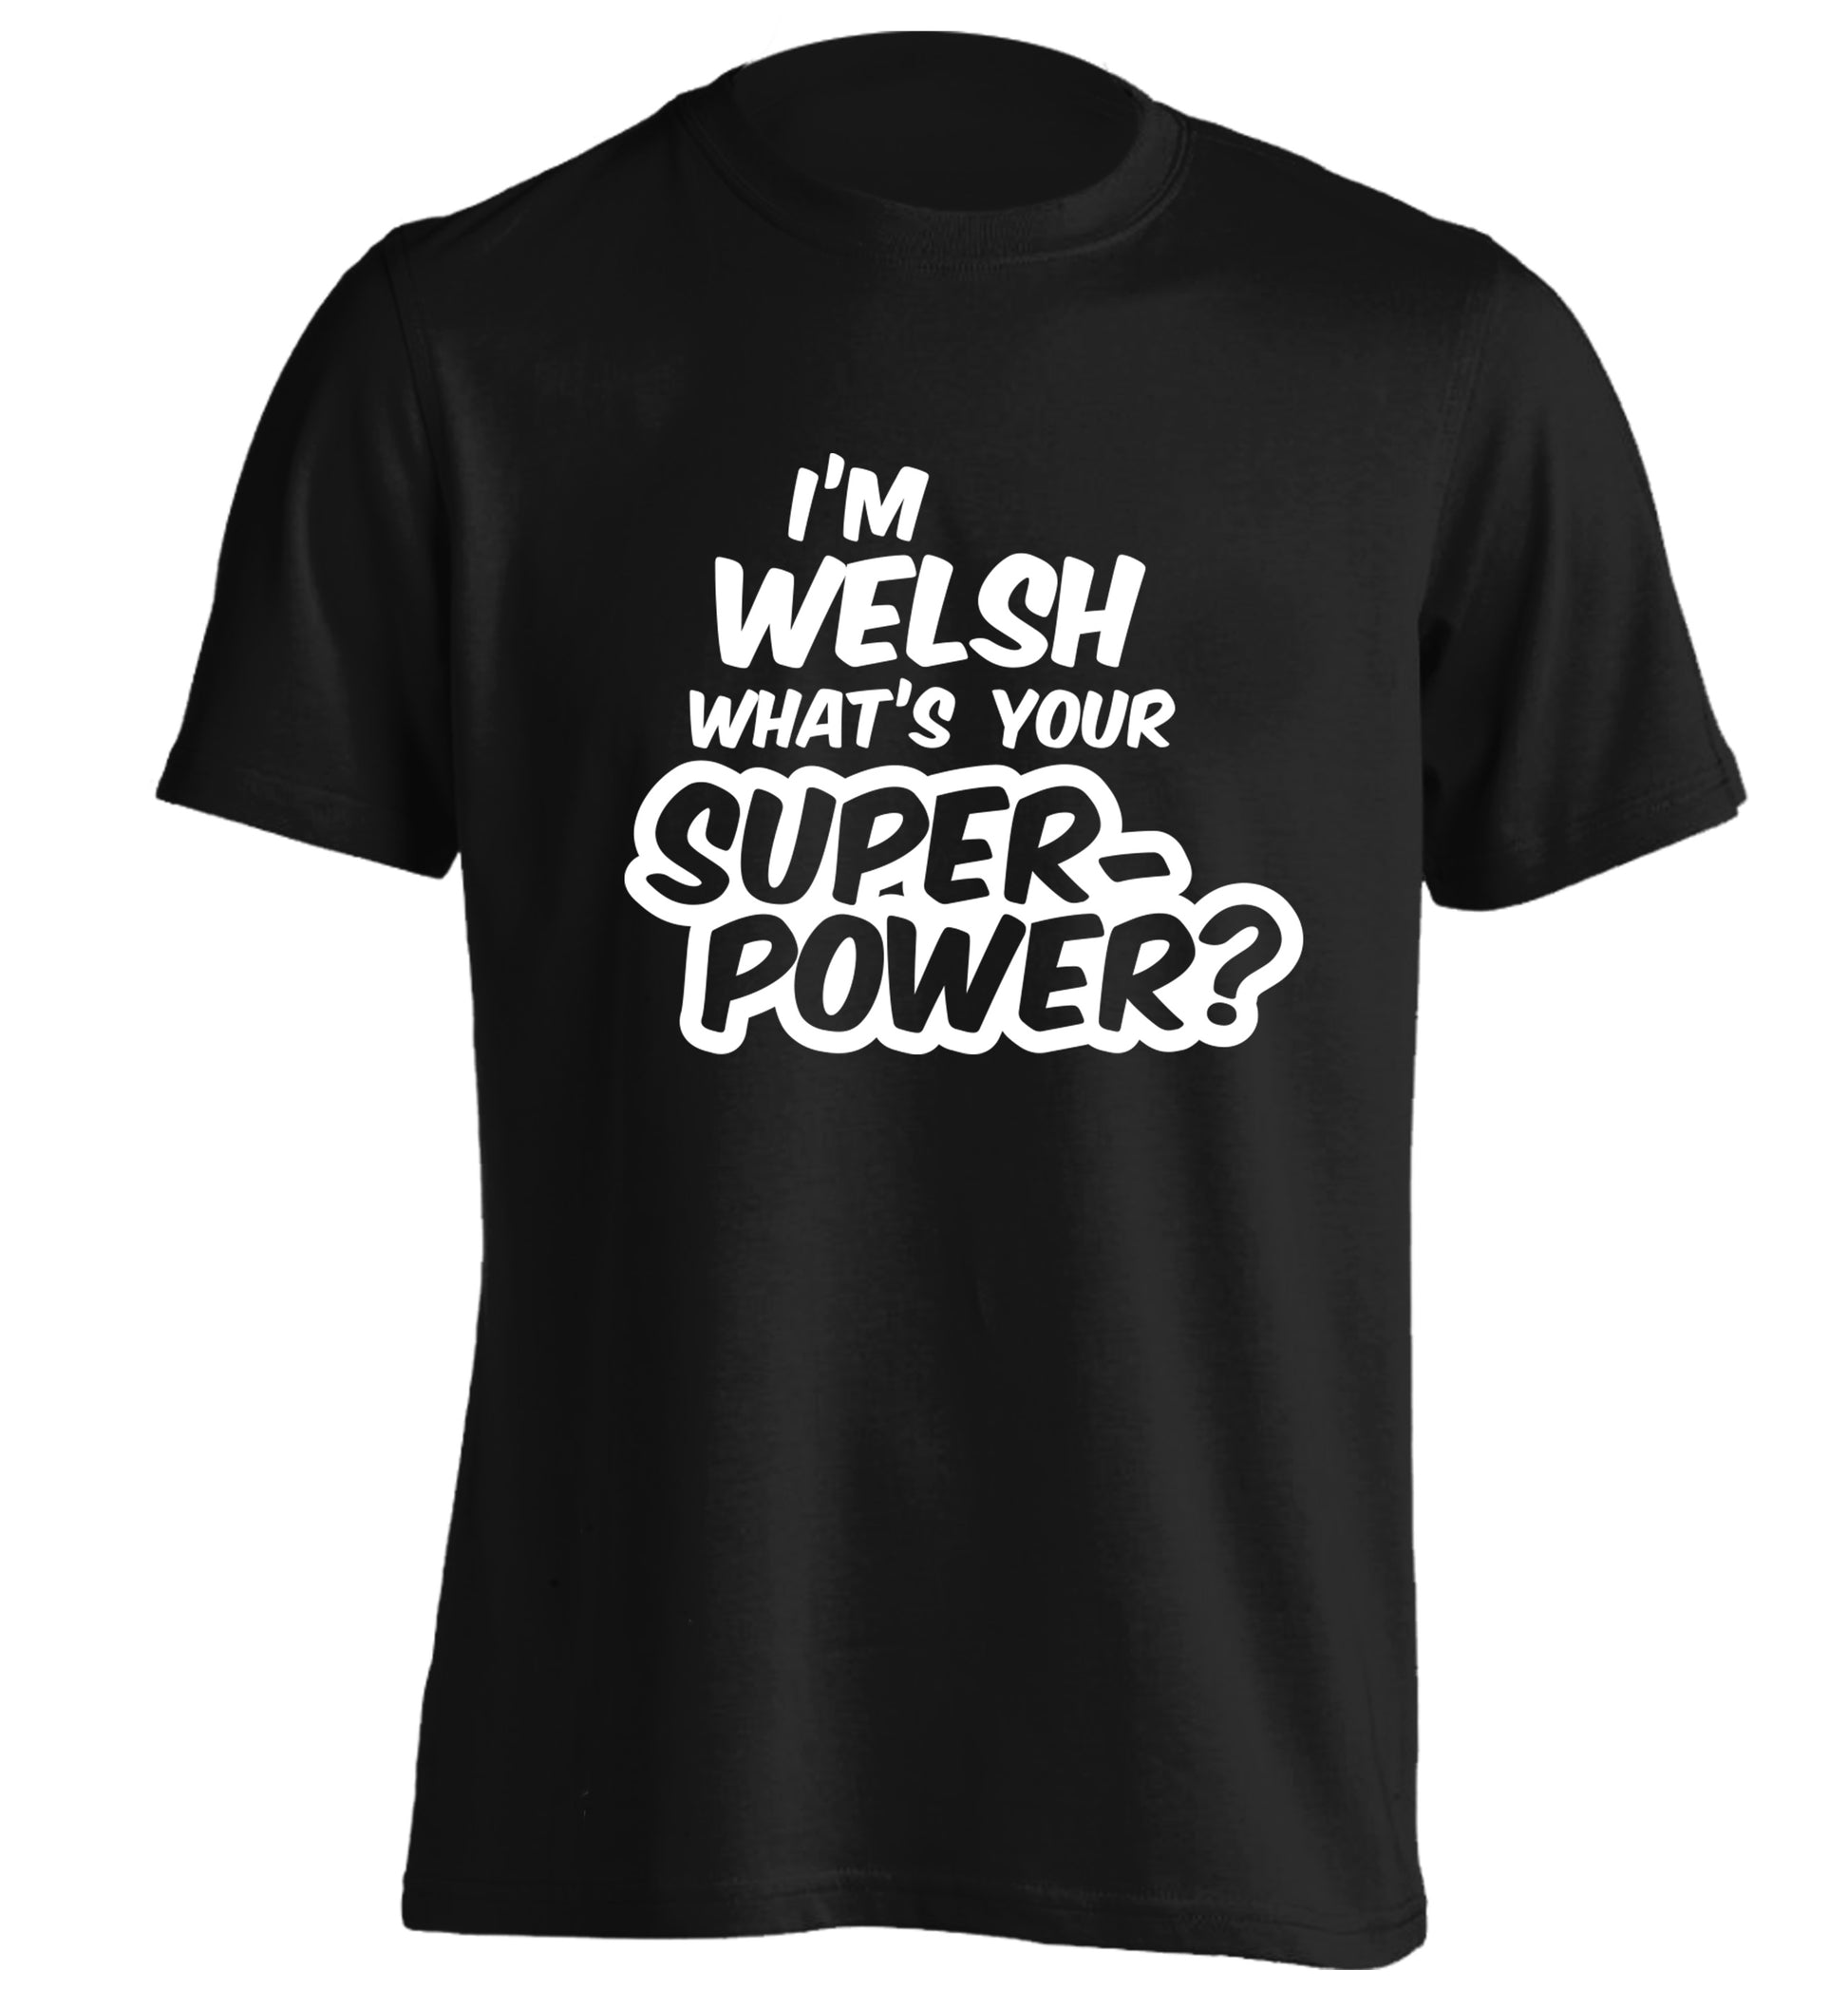 I'm Welsh what's your superpower? adults unisex black Tshirt 2XL